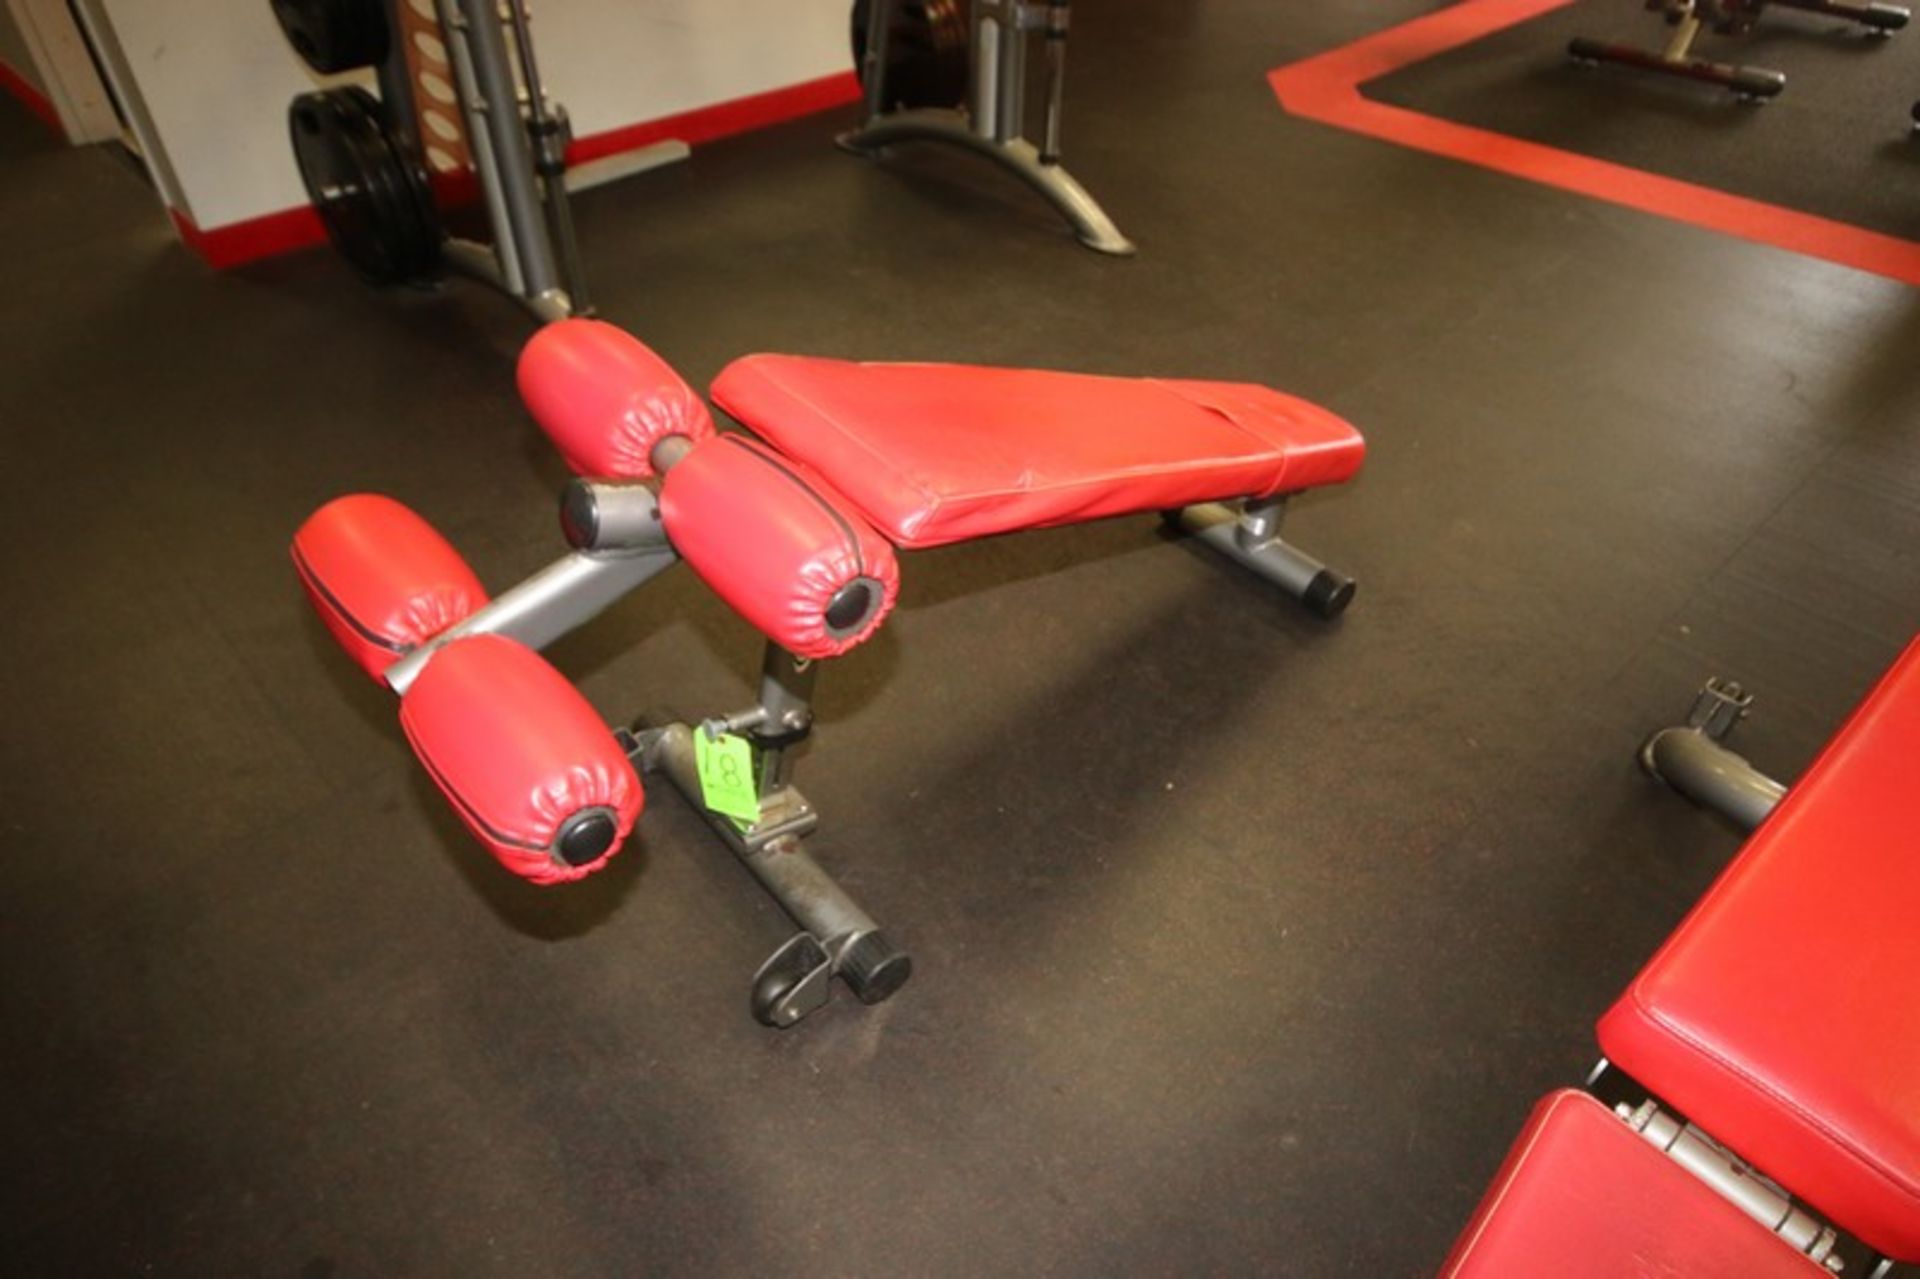 Matrix Decline Bench, with (2) Wheels on Frame, Bench Total Length: Aprox. 47" L (LOCATED @ 2800